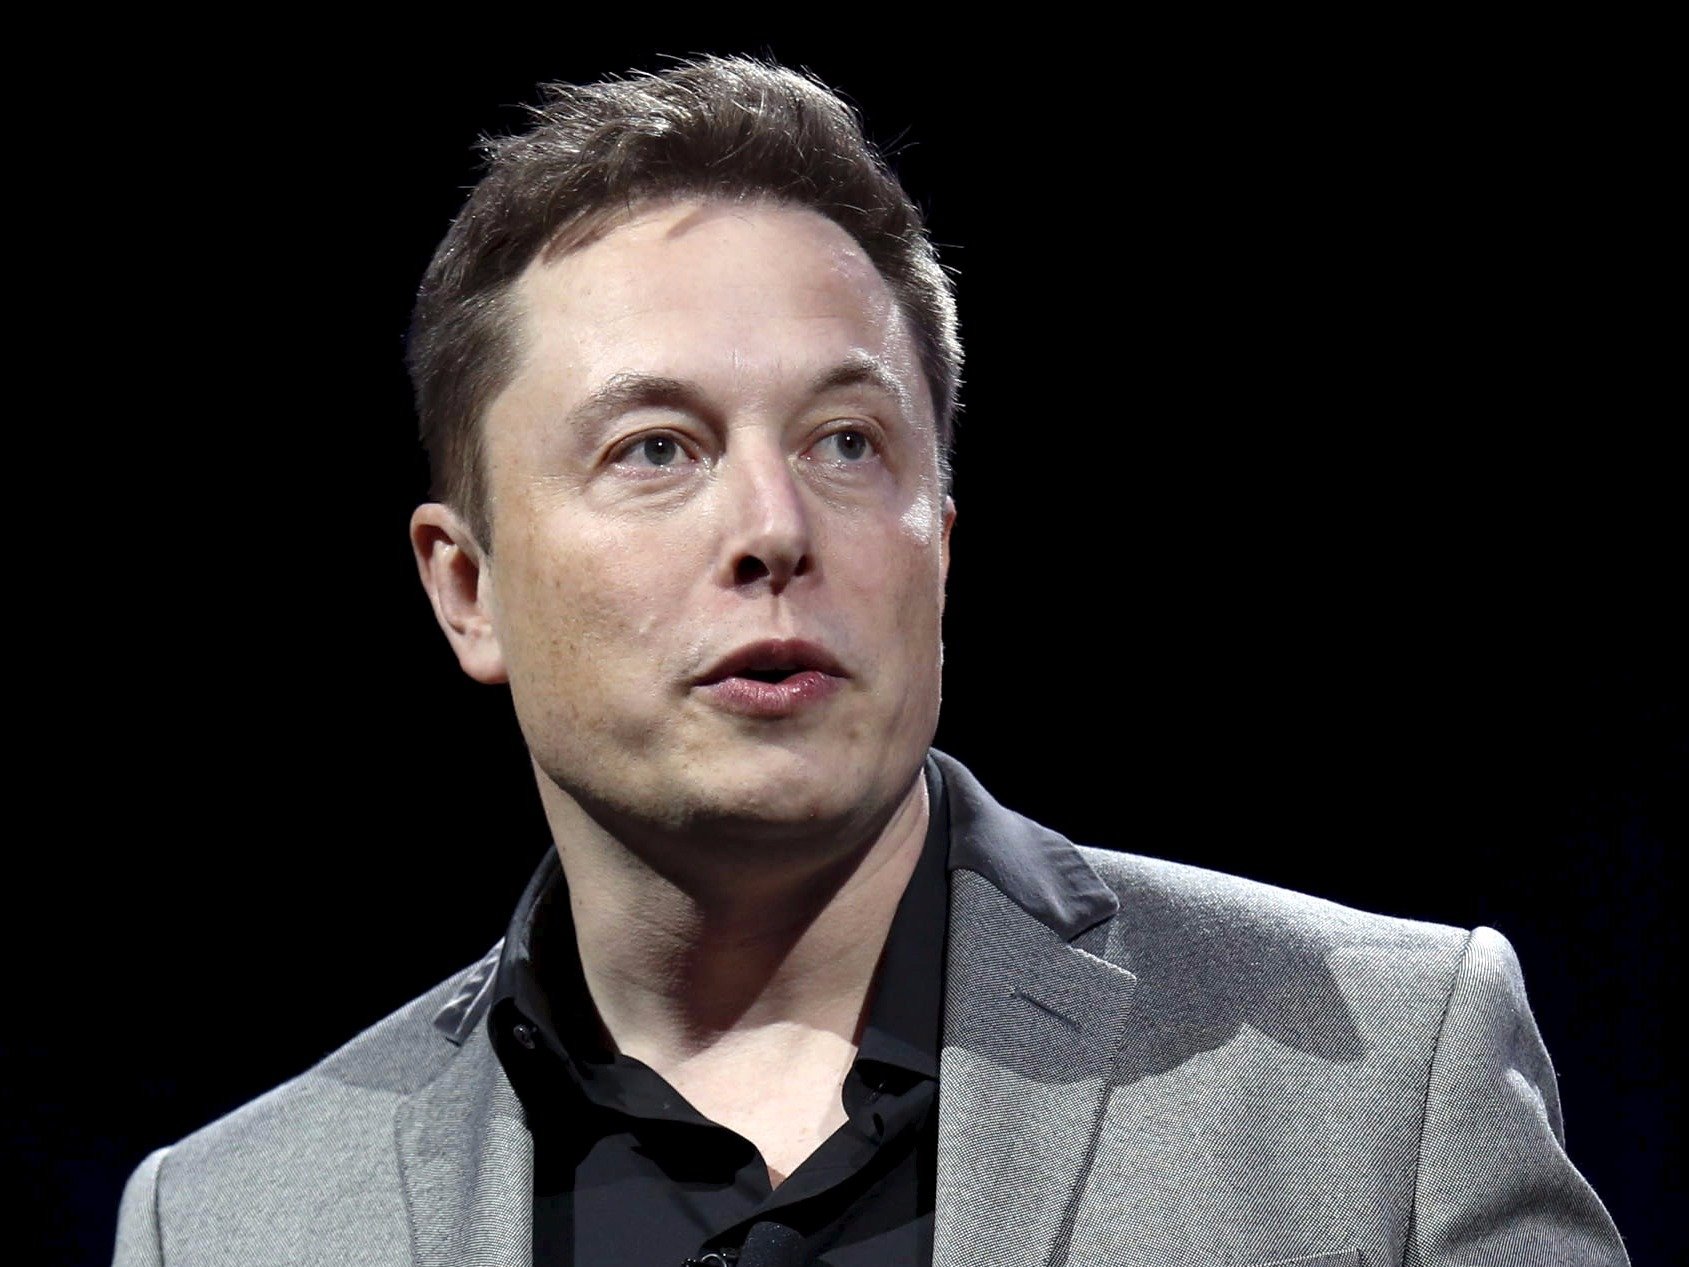 Elon Musk Images, News & Twitter on UberPeopleSearch